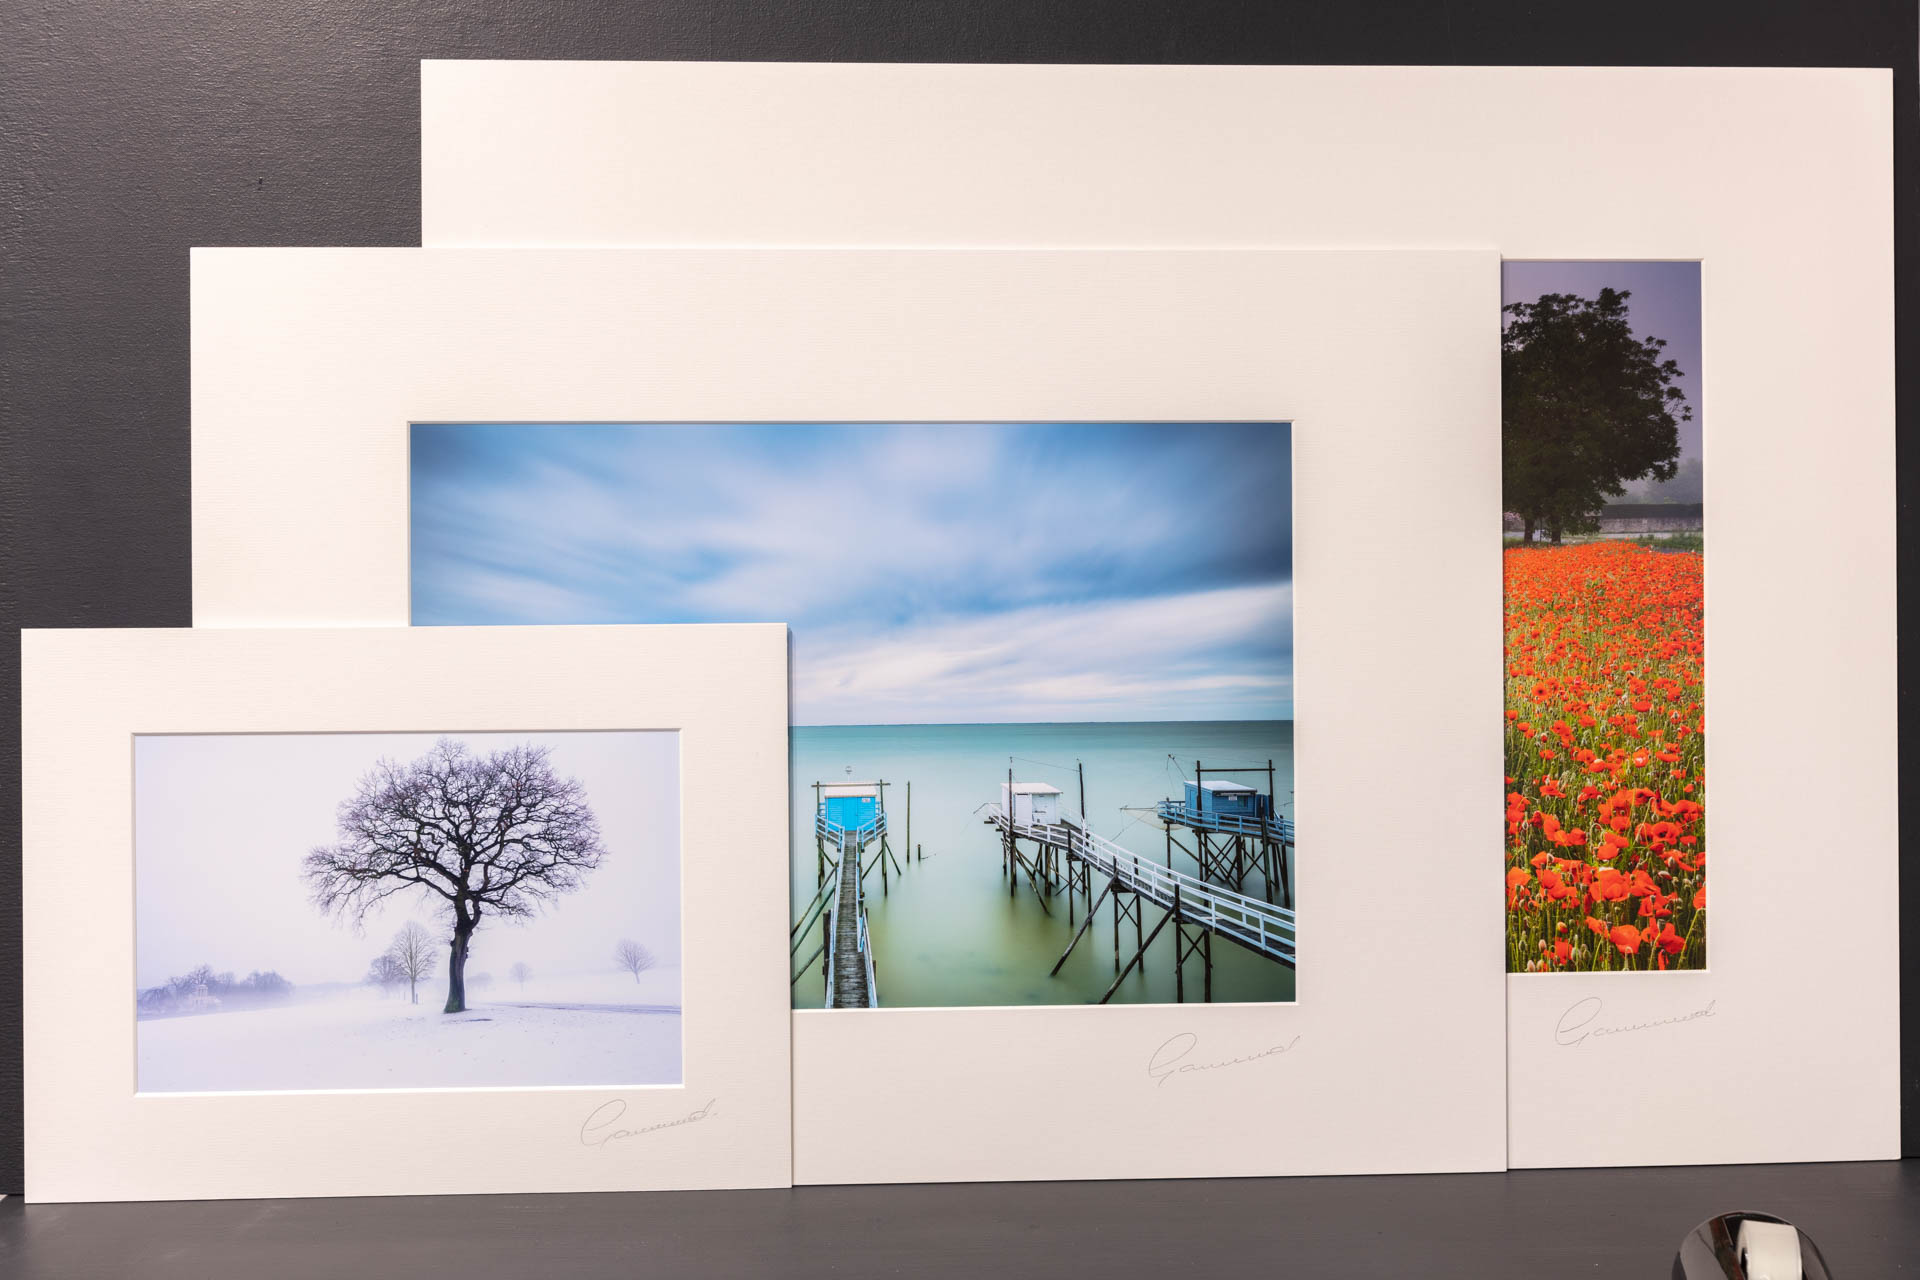 Mounted & Signed Images in Standard Frame Sizes